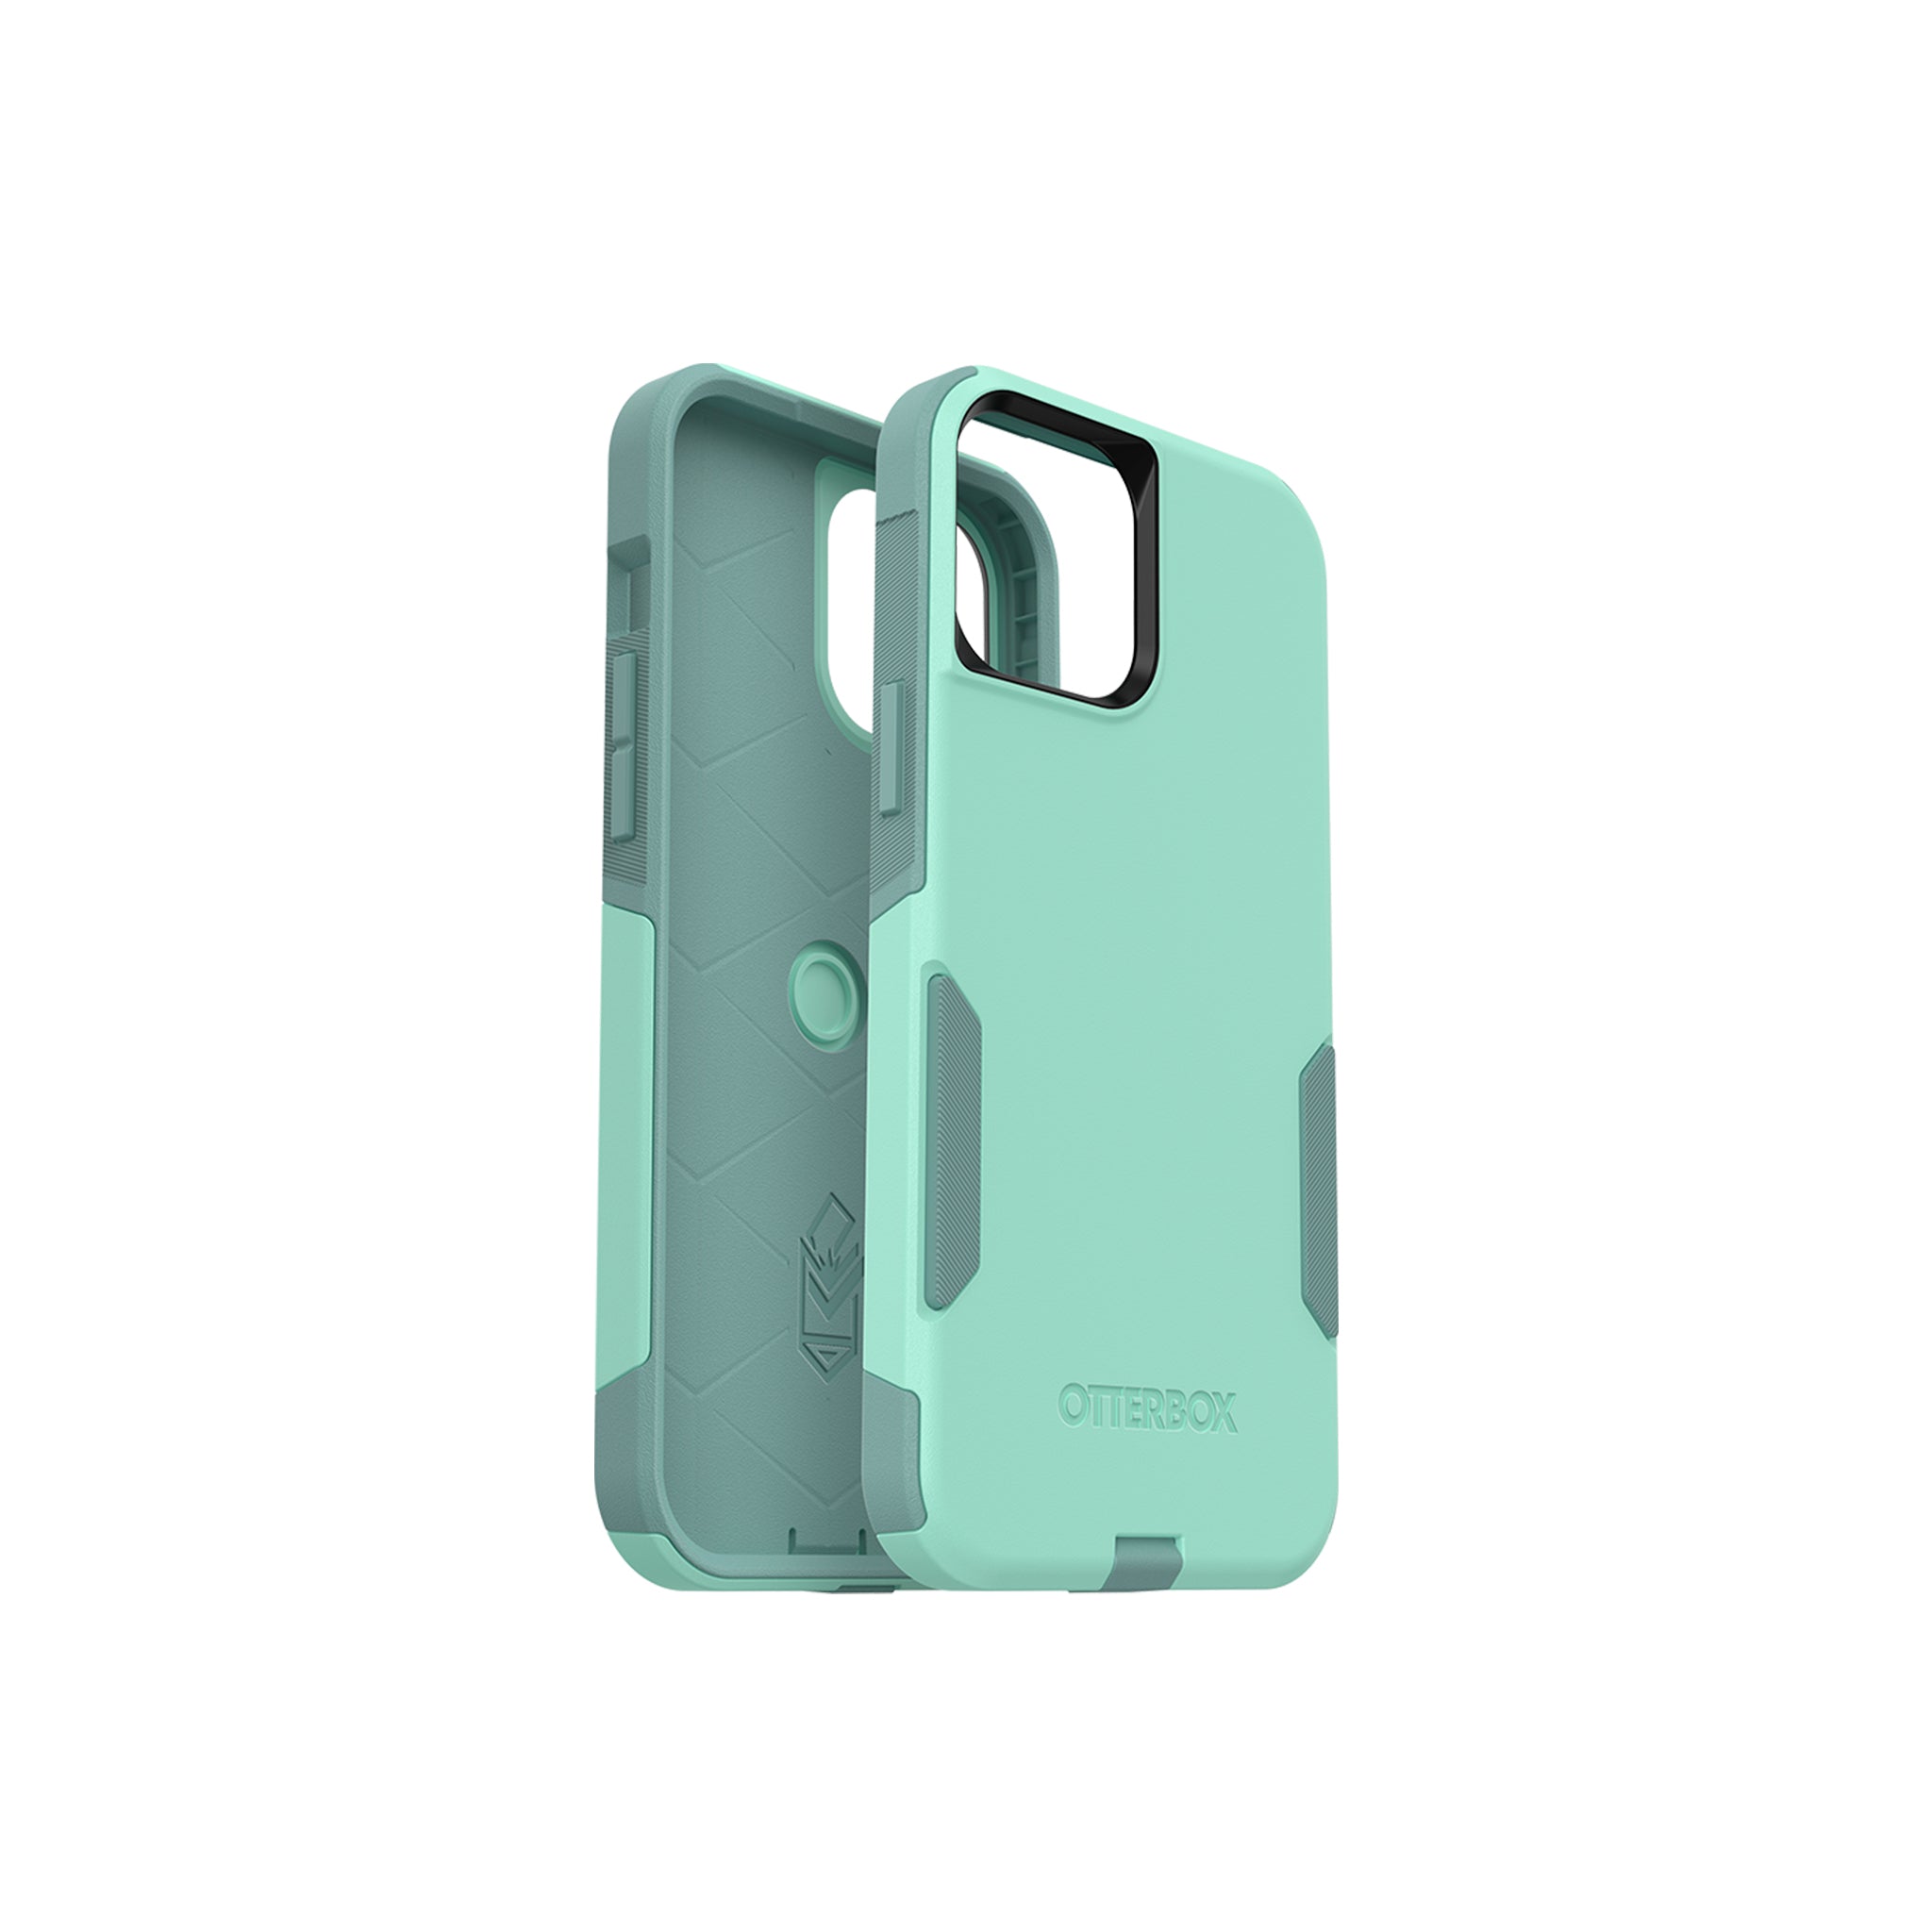 OtterBox - Commuter for iPhone 12 Pro Max - Ocean Way